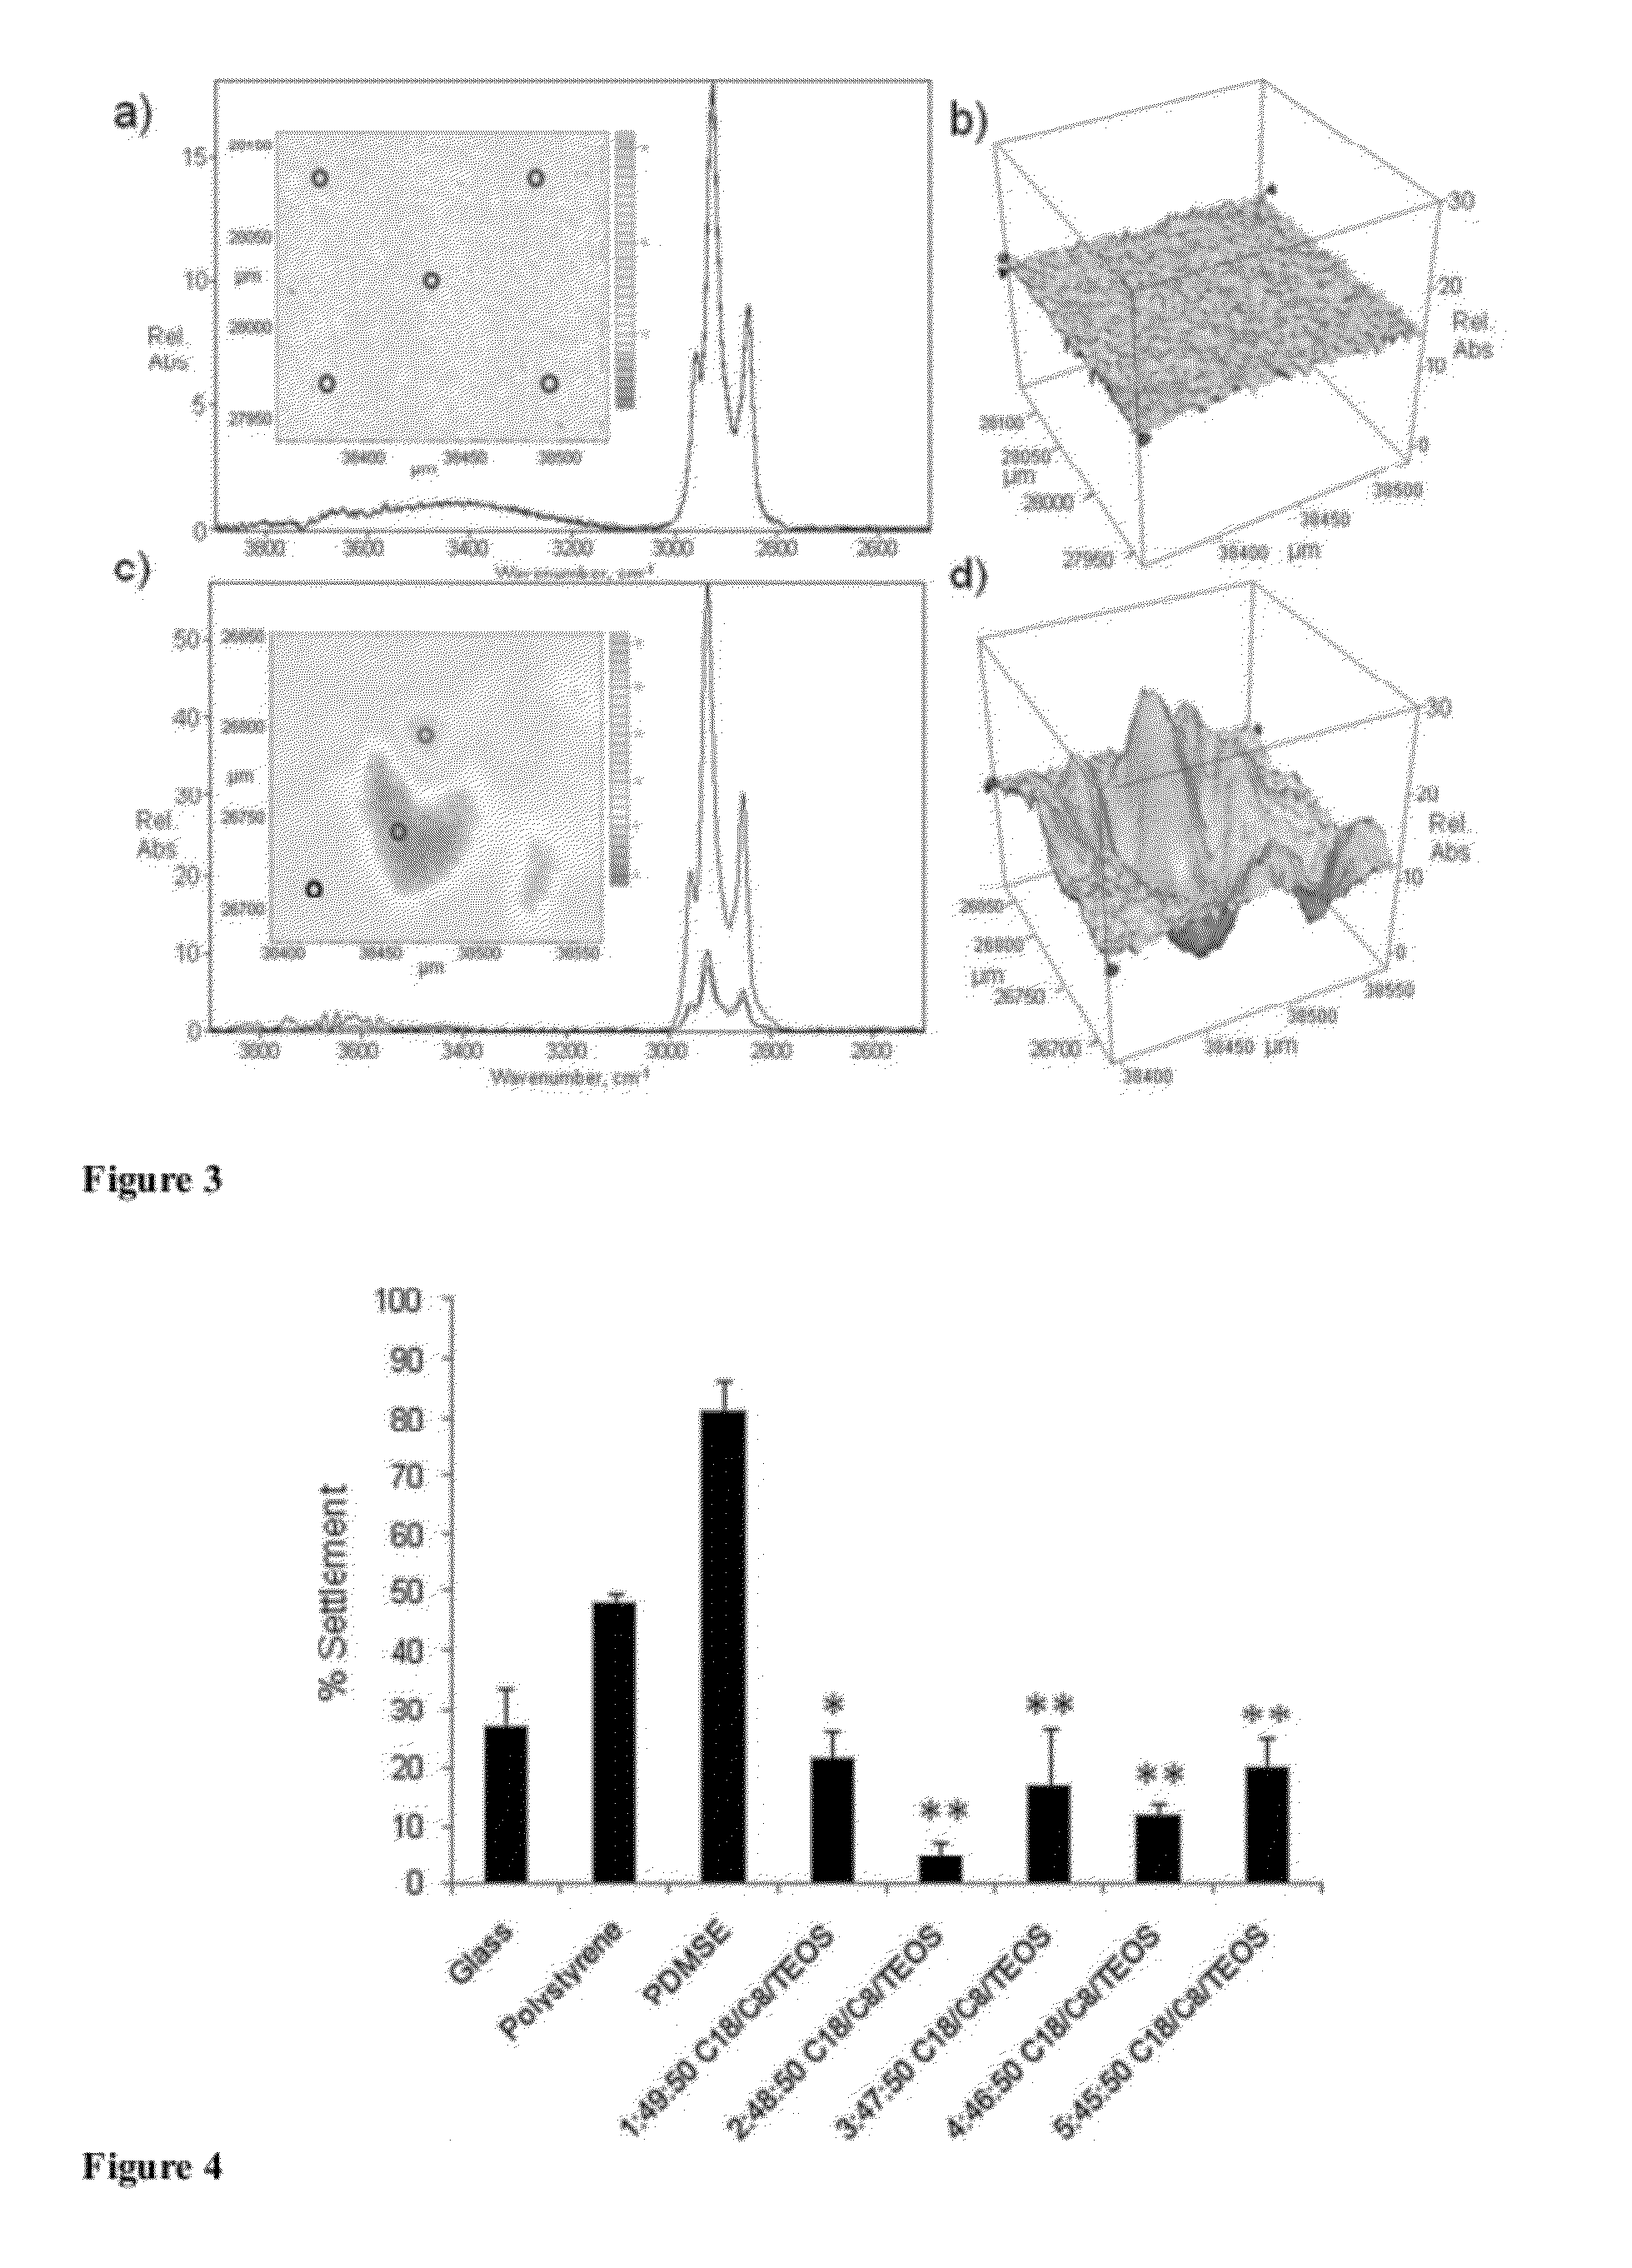 Anti-Fouling Coating Compositions and Methods For Preventing the Fouling of Surfaces